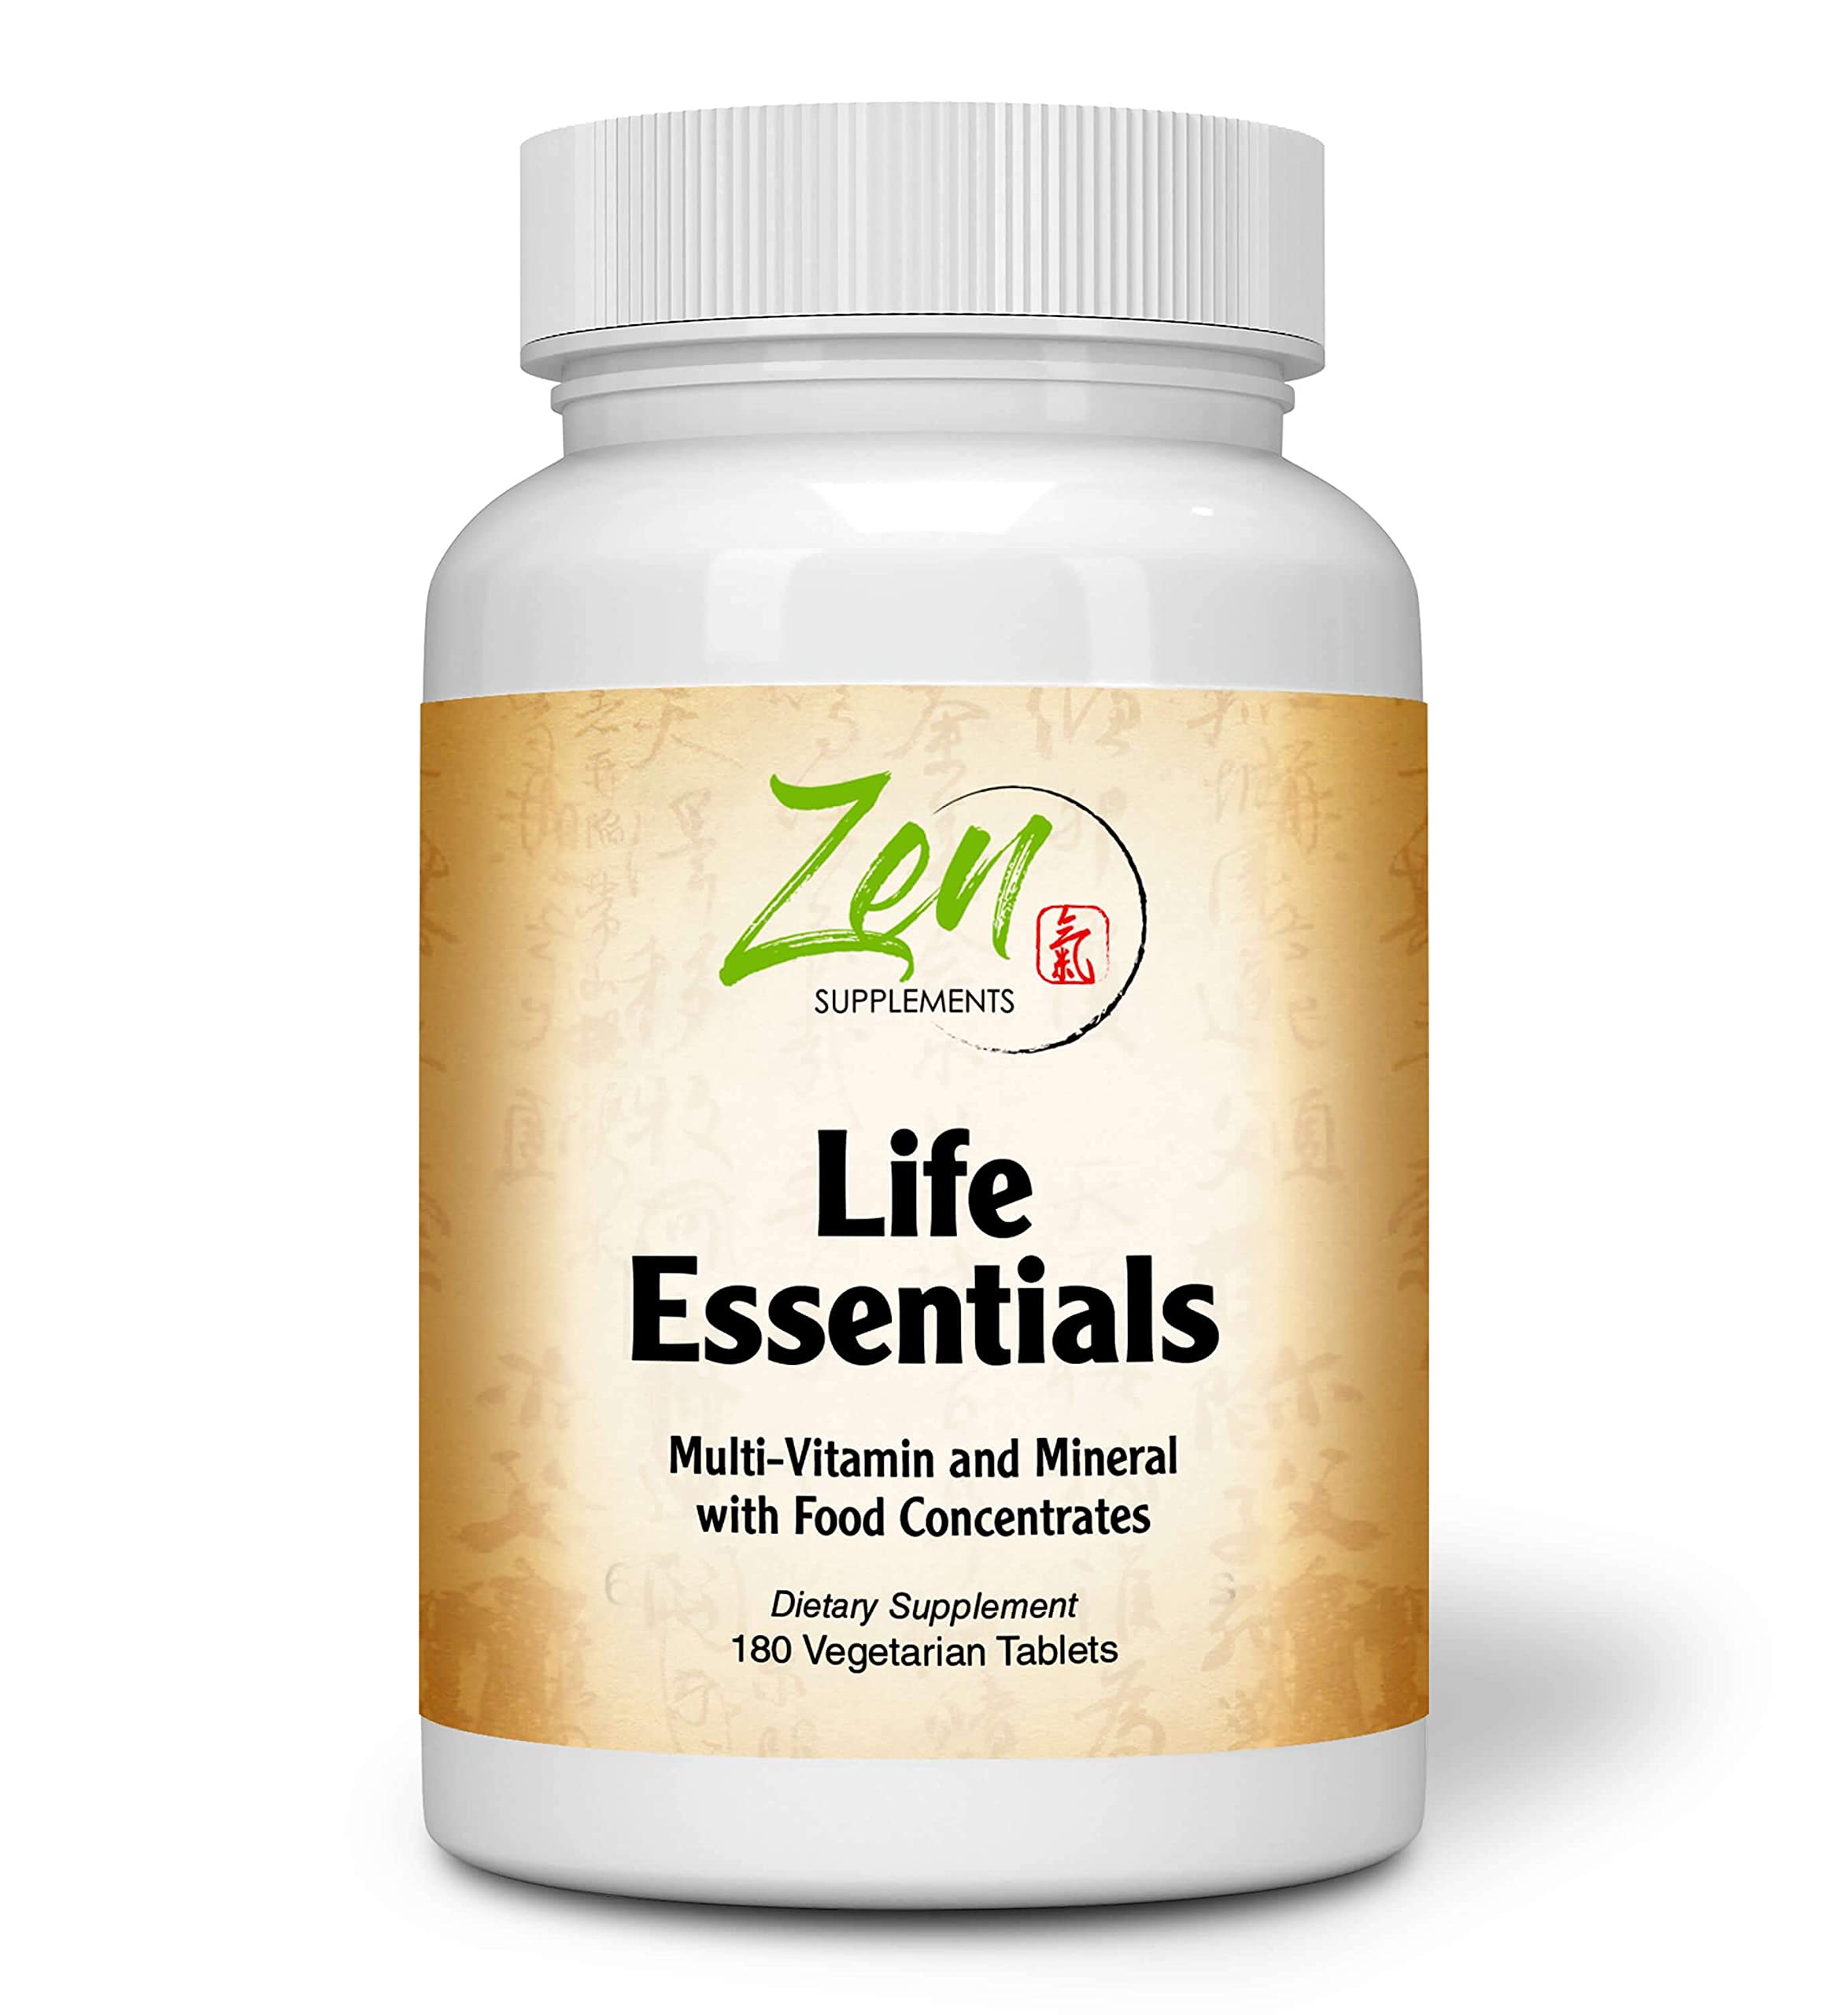 Zen Supplements - Life Essentials Multi-Vitamin from Whole Foods - Real Raw Veggies, Fruits, Superfoods, Probiotics, Digestive Enzymes, Herbs 180-Tabs